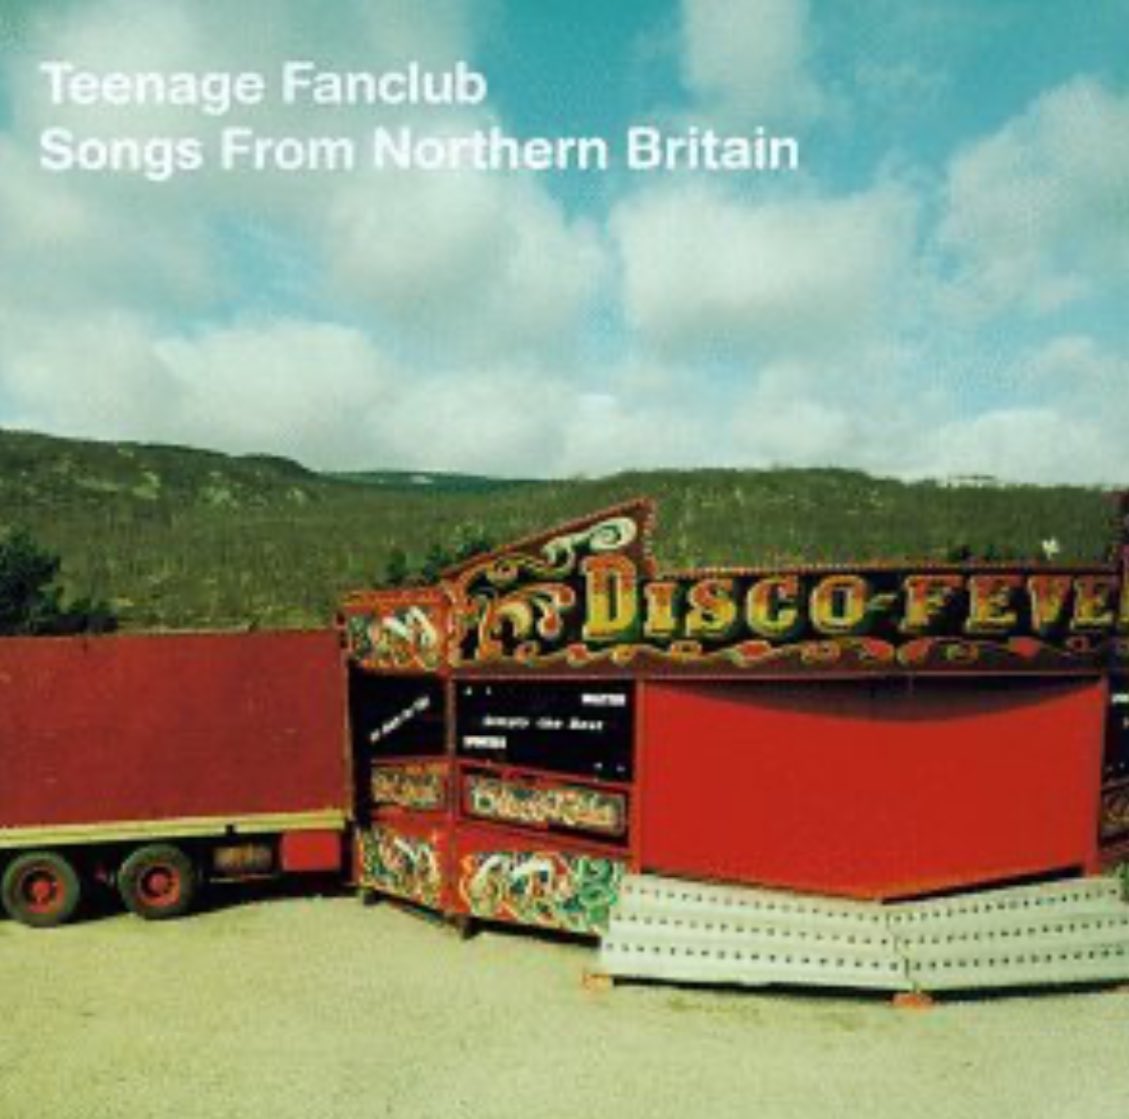 #366albums
#teenagefanclub at their glorious best. Album 6 almost effortless at this stage. Love’s “ain’t that enough”, Blake’s “I don’t want control of you” and McGinley’s “I don’t care”, a band blessed with songwriting talent